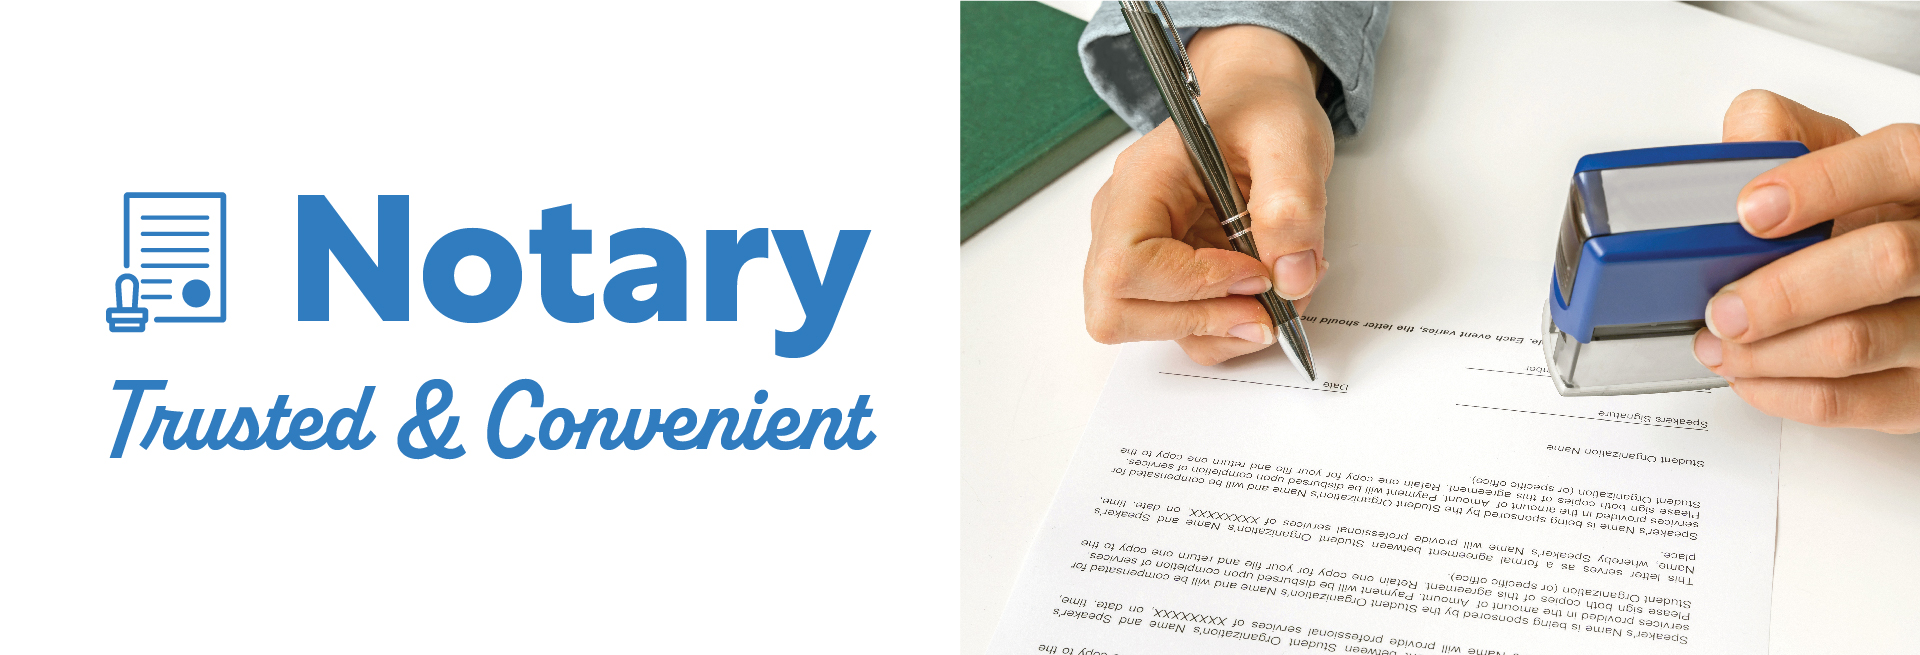 Notary - Trusted and Convenient 